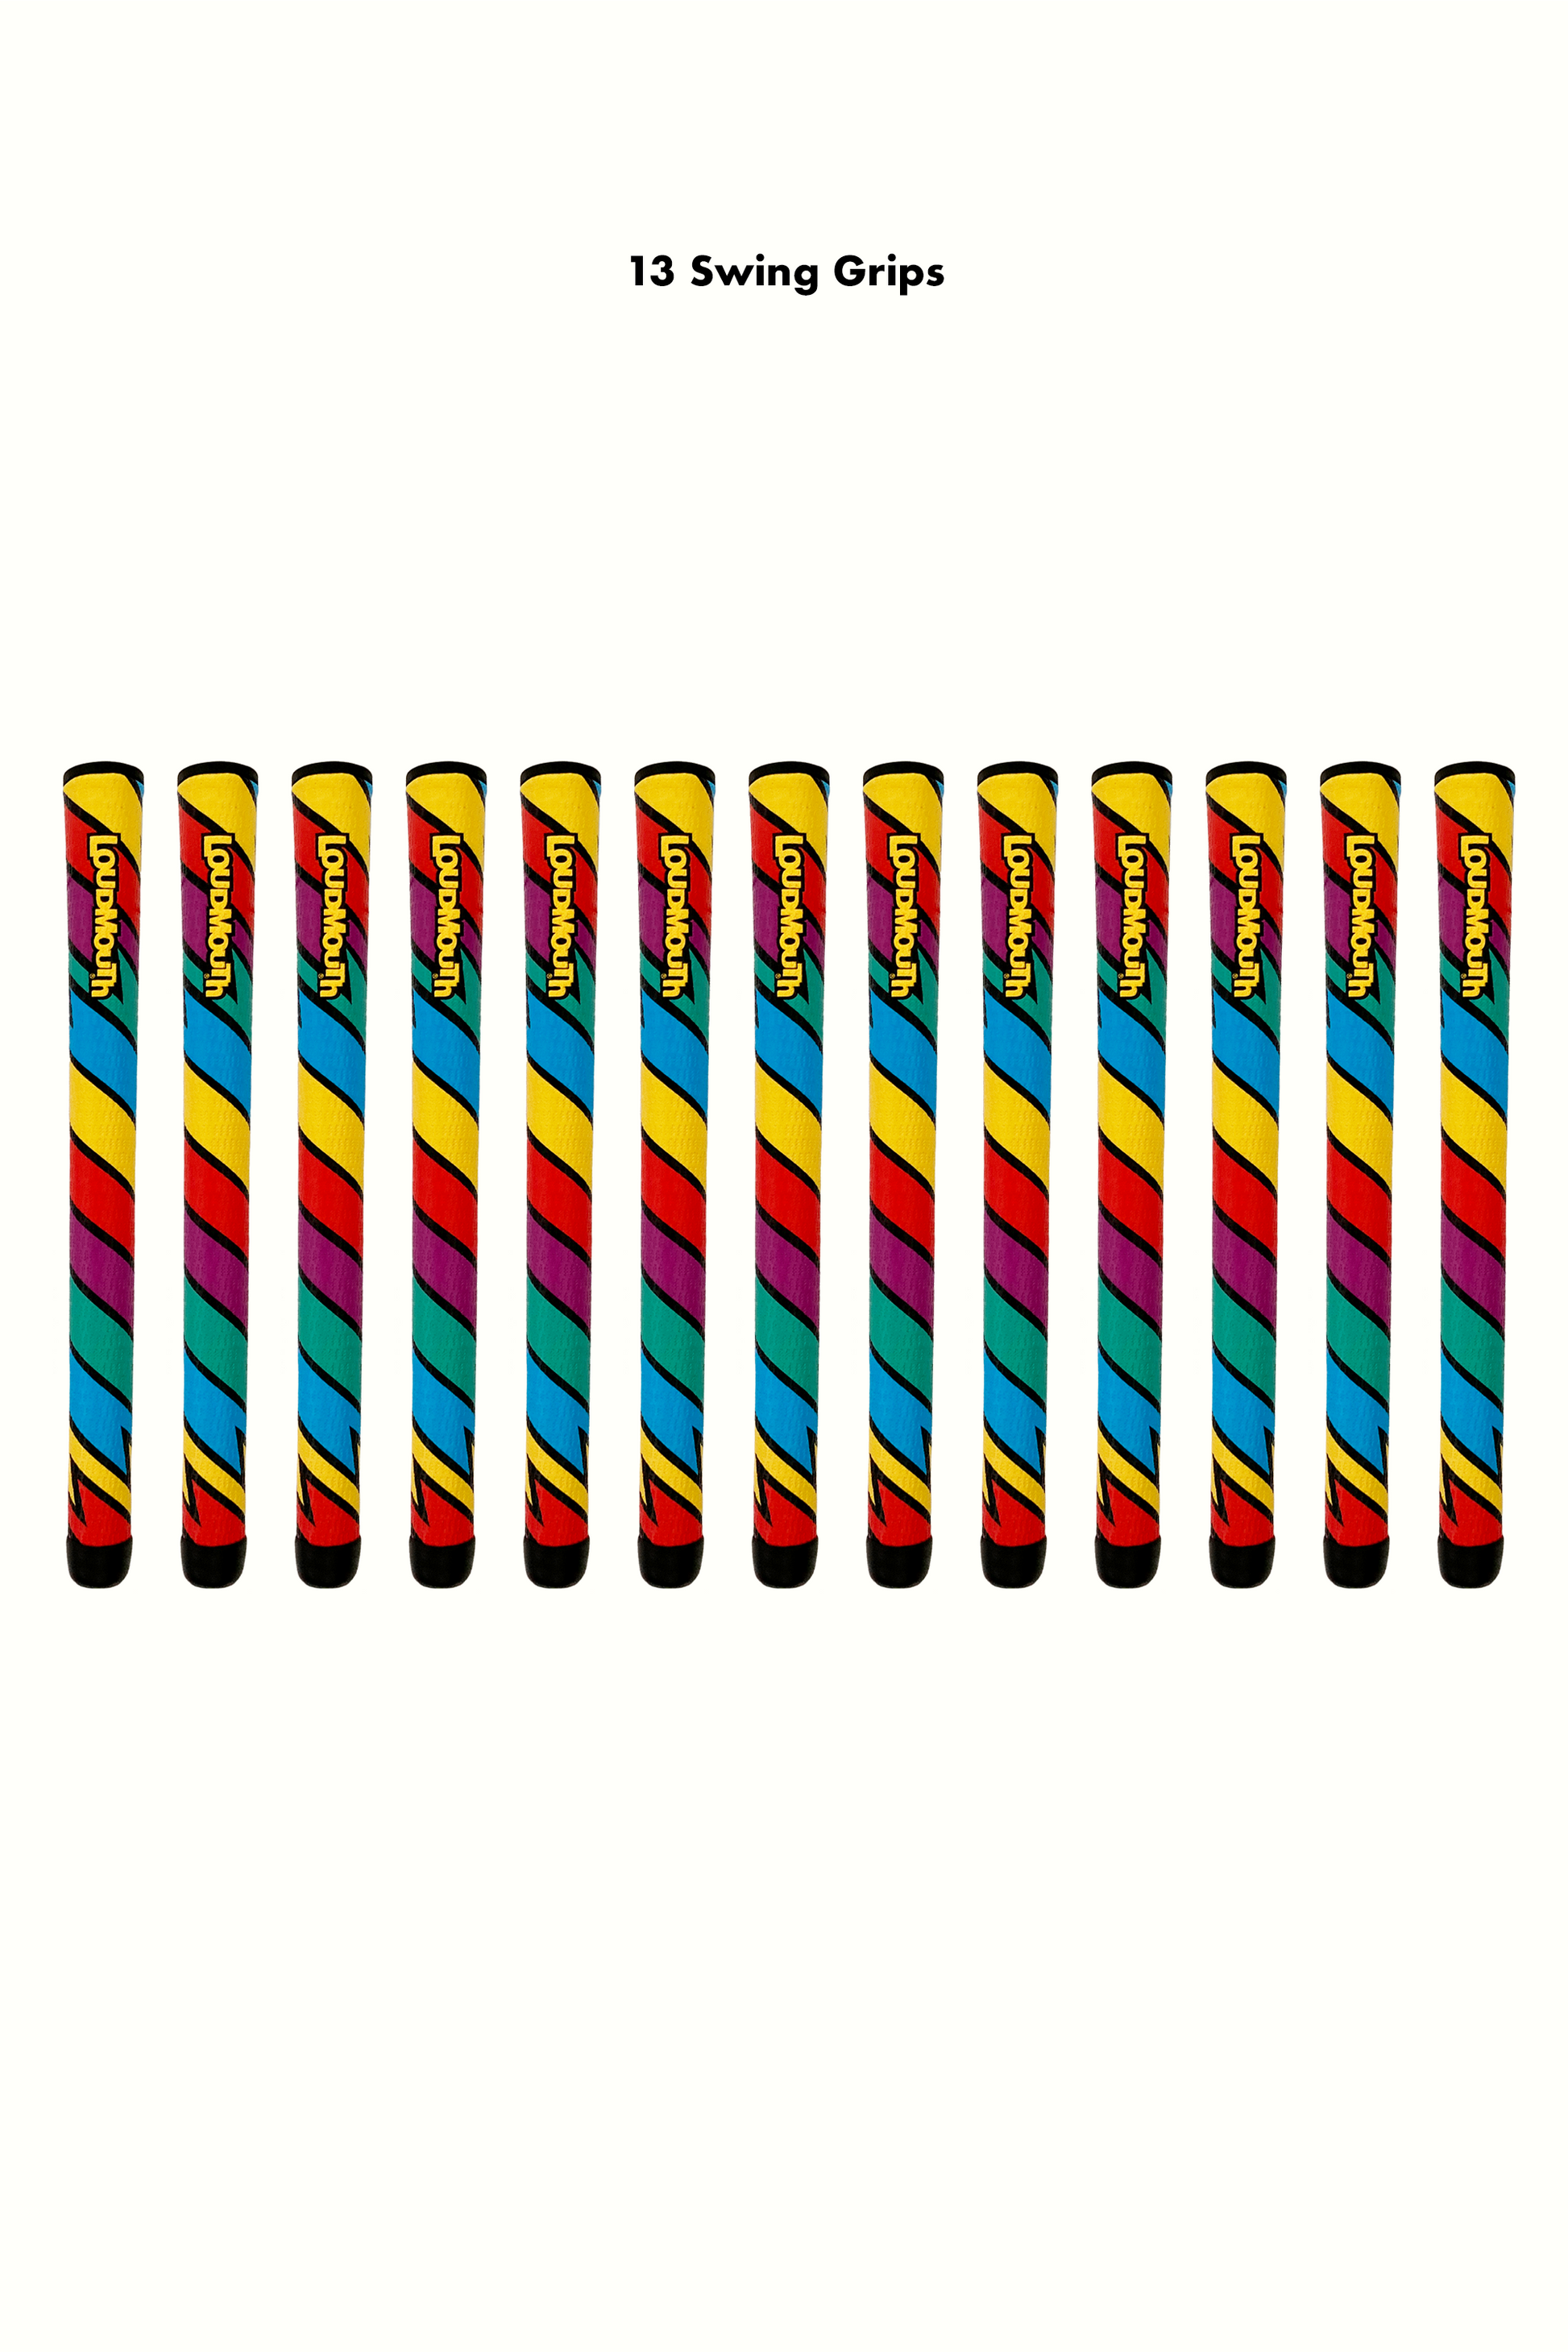 A pack of brightly colored golf grips